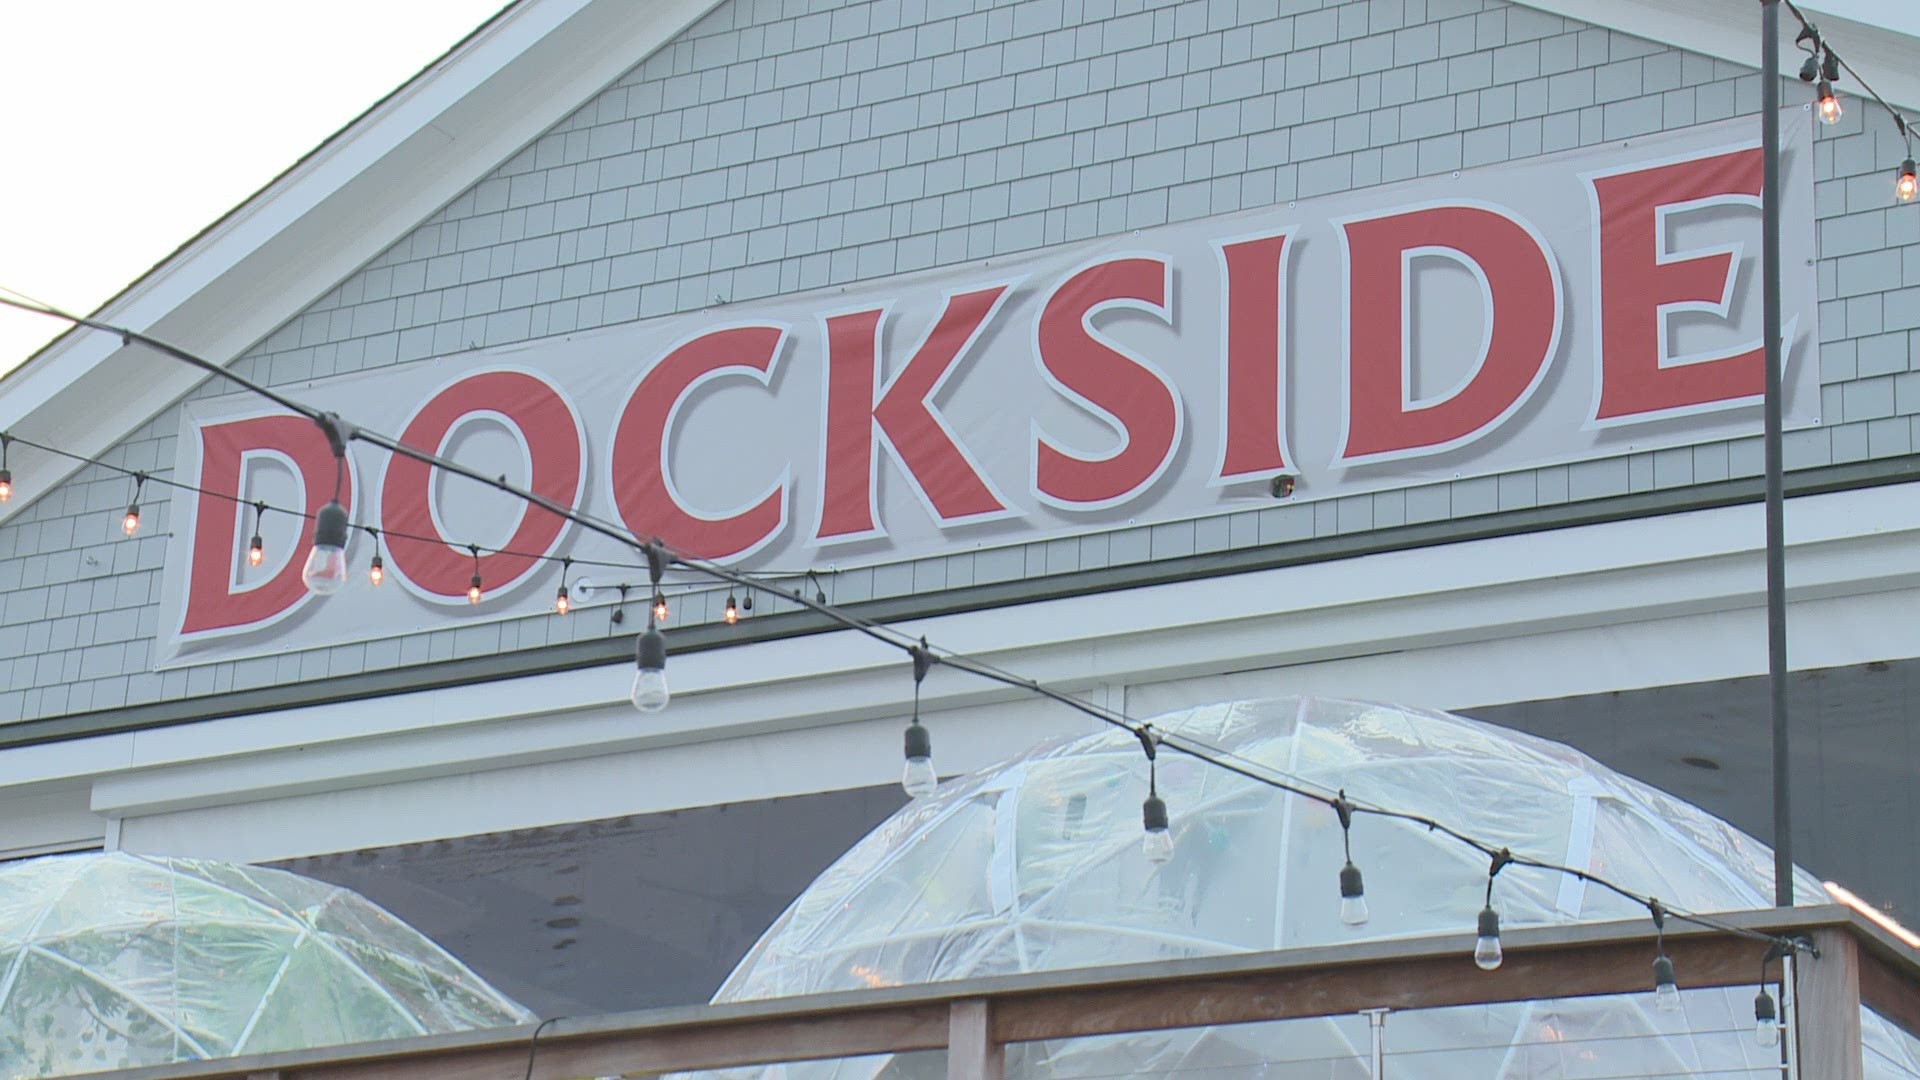 Dockside is also welcoming reservations for nearly a dozen outdoor igloos that seat four.